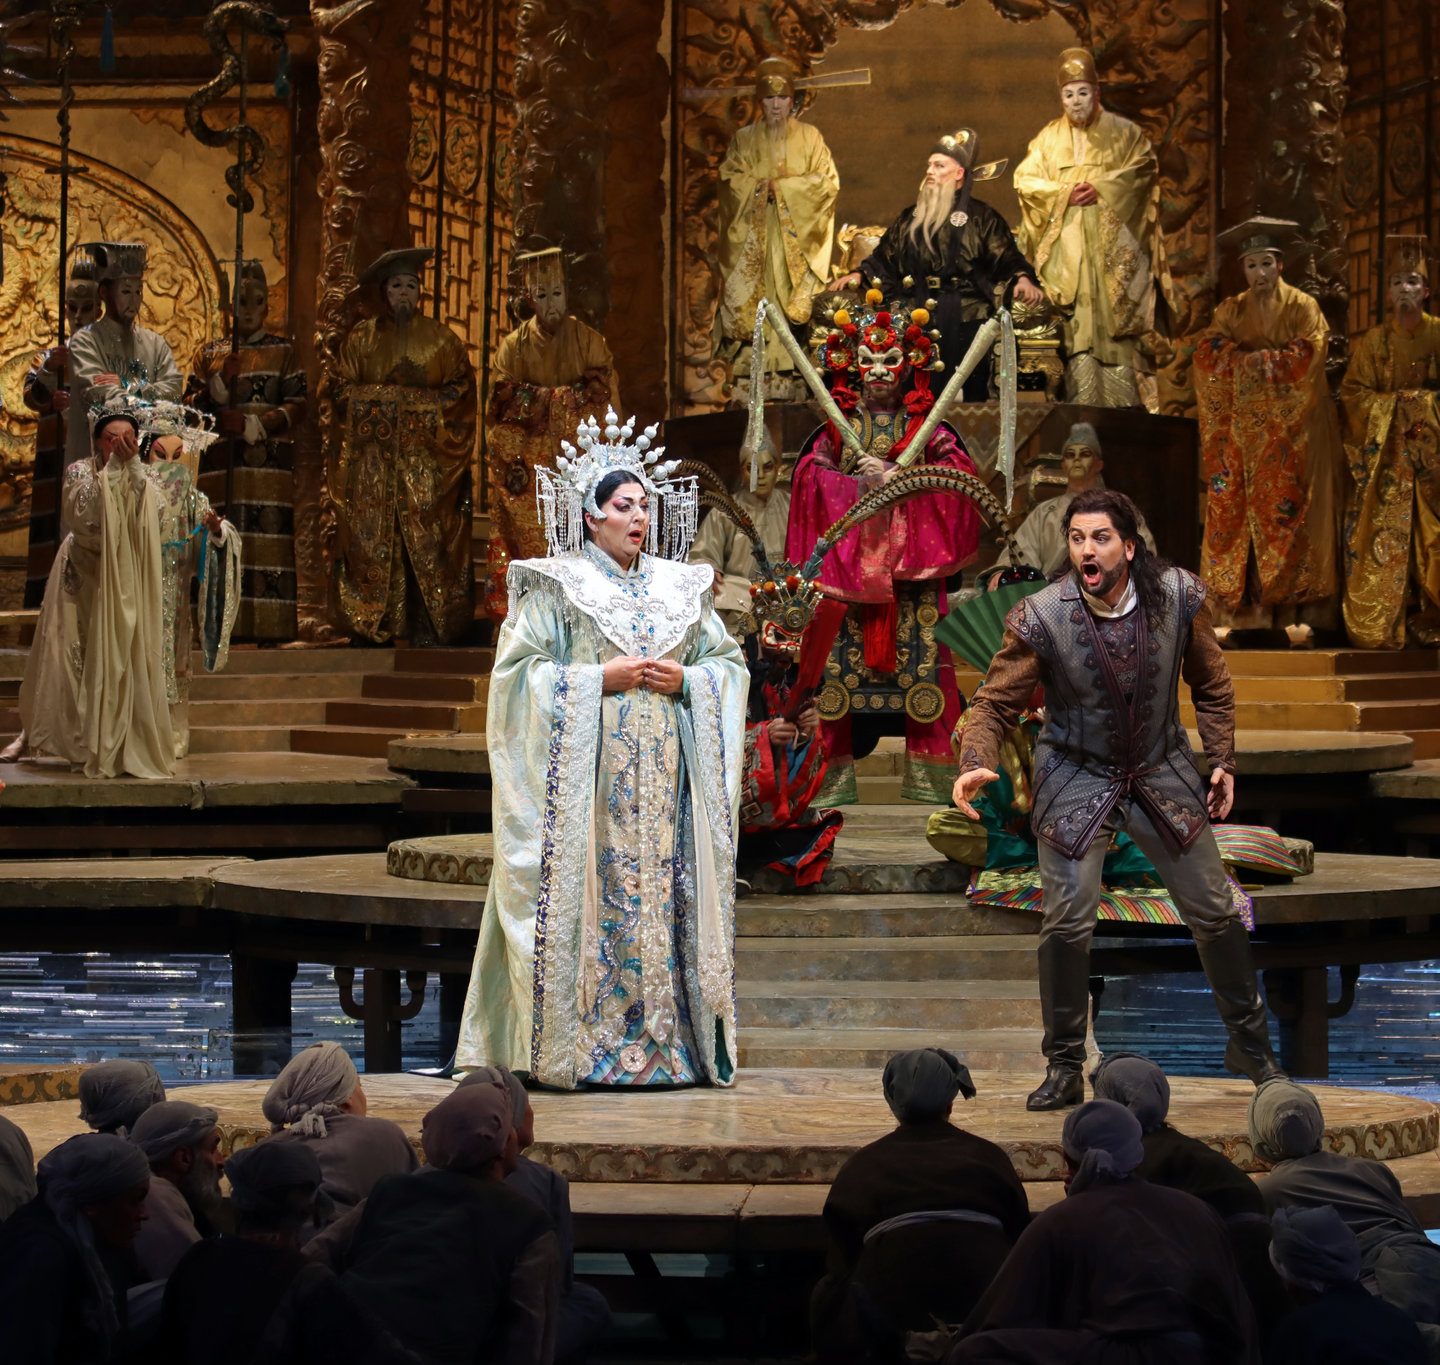 A Day at the Opera: re-imagining Puccini’s ‘Turandot’